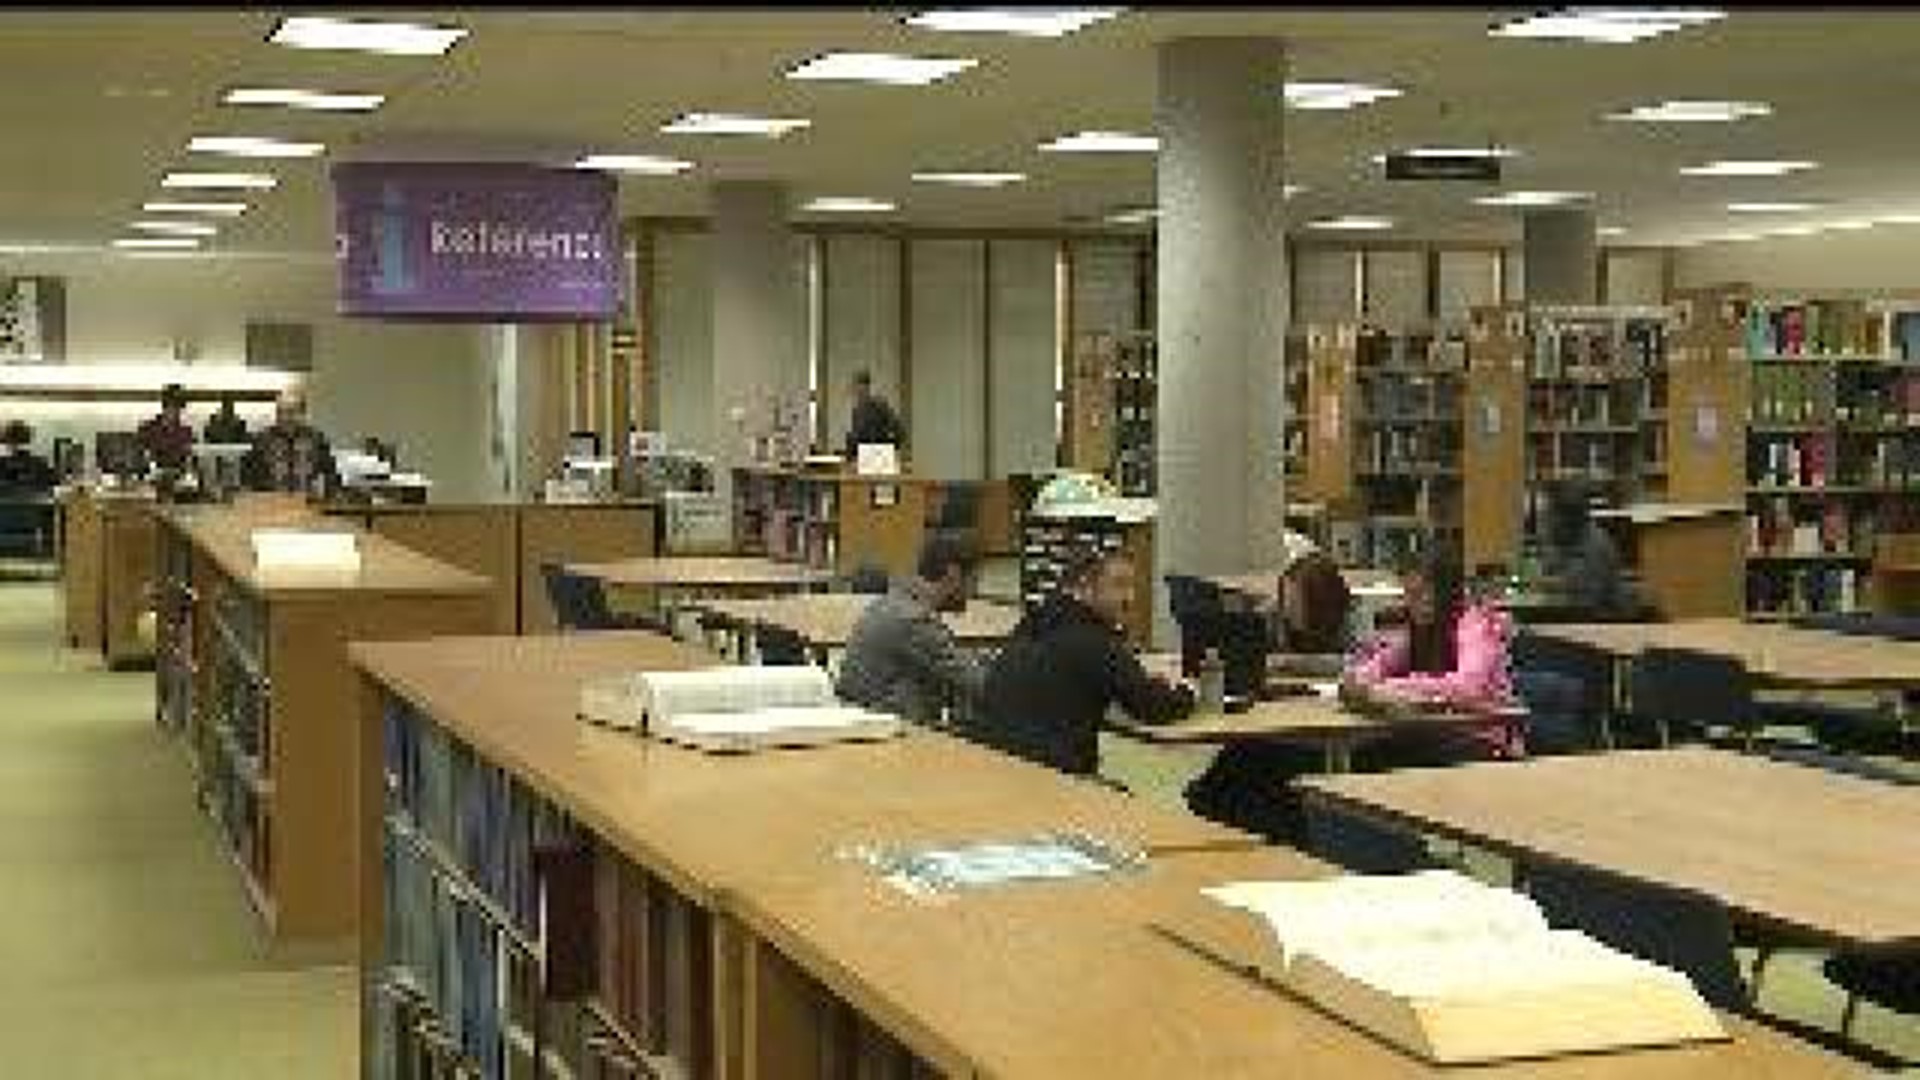 Applications up at Western Illinois University